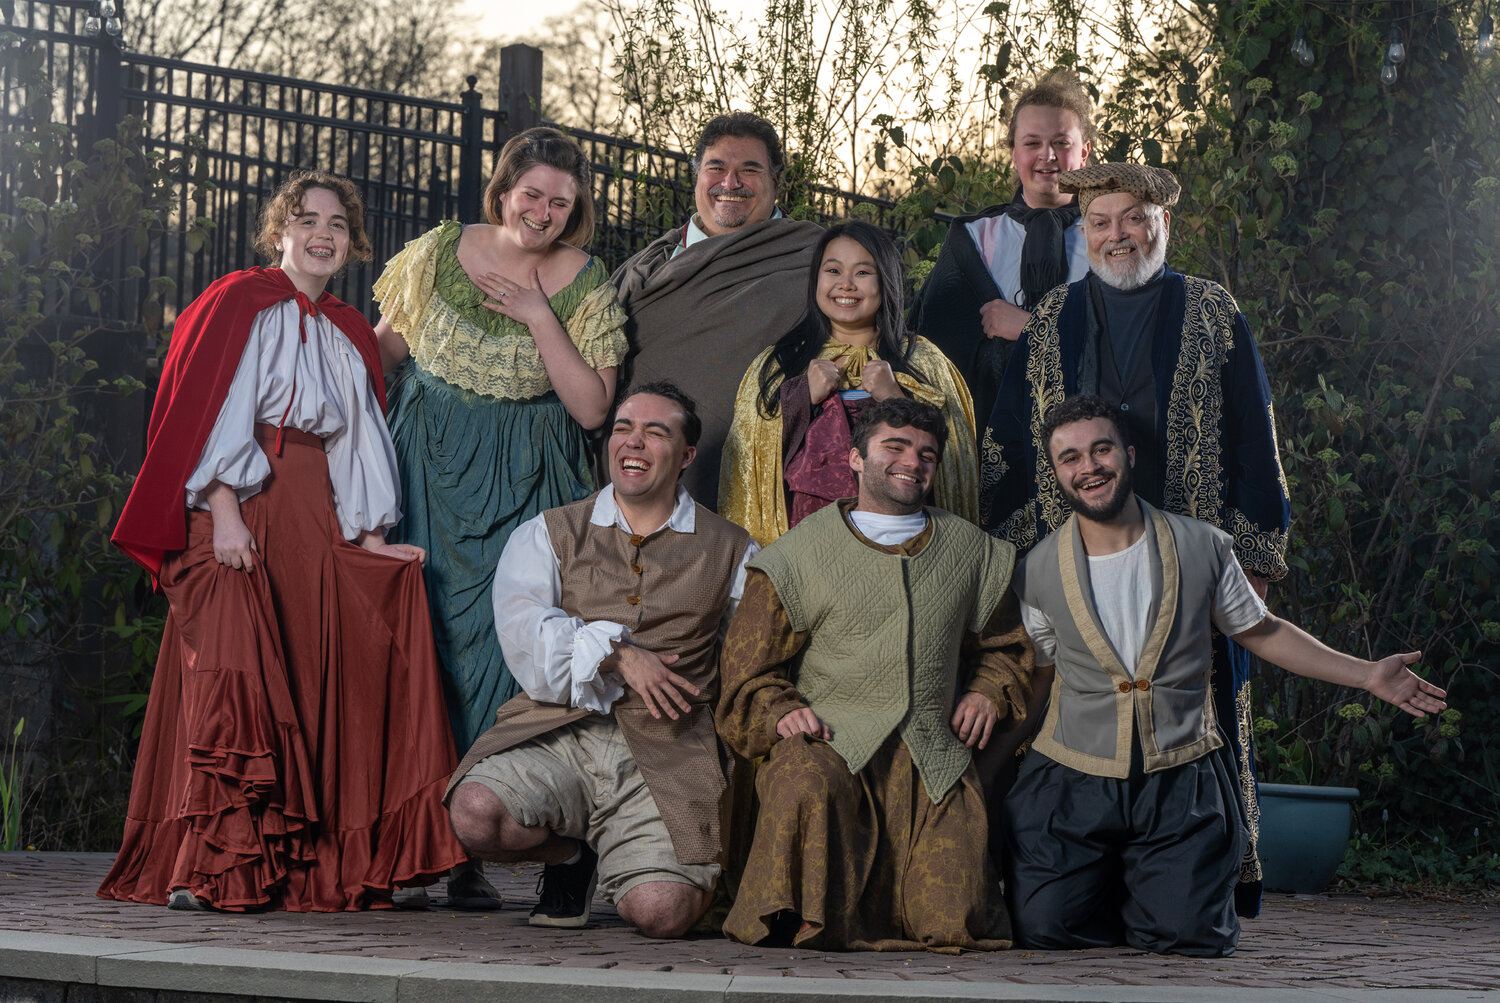 The Merry Wives of Windsor cast performs Shakespeare on the Saugatuck